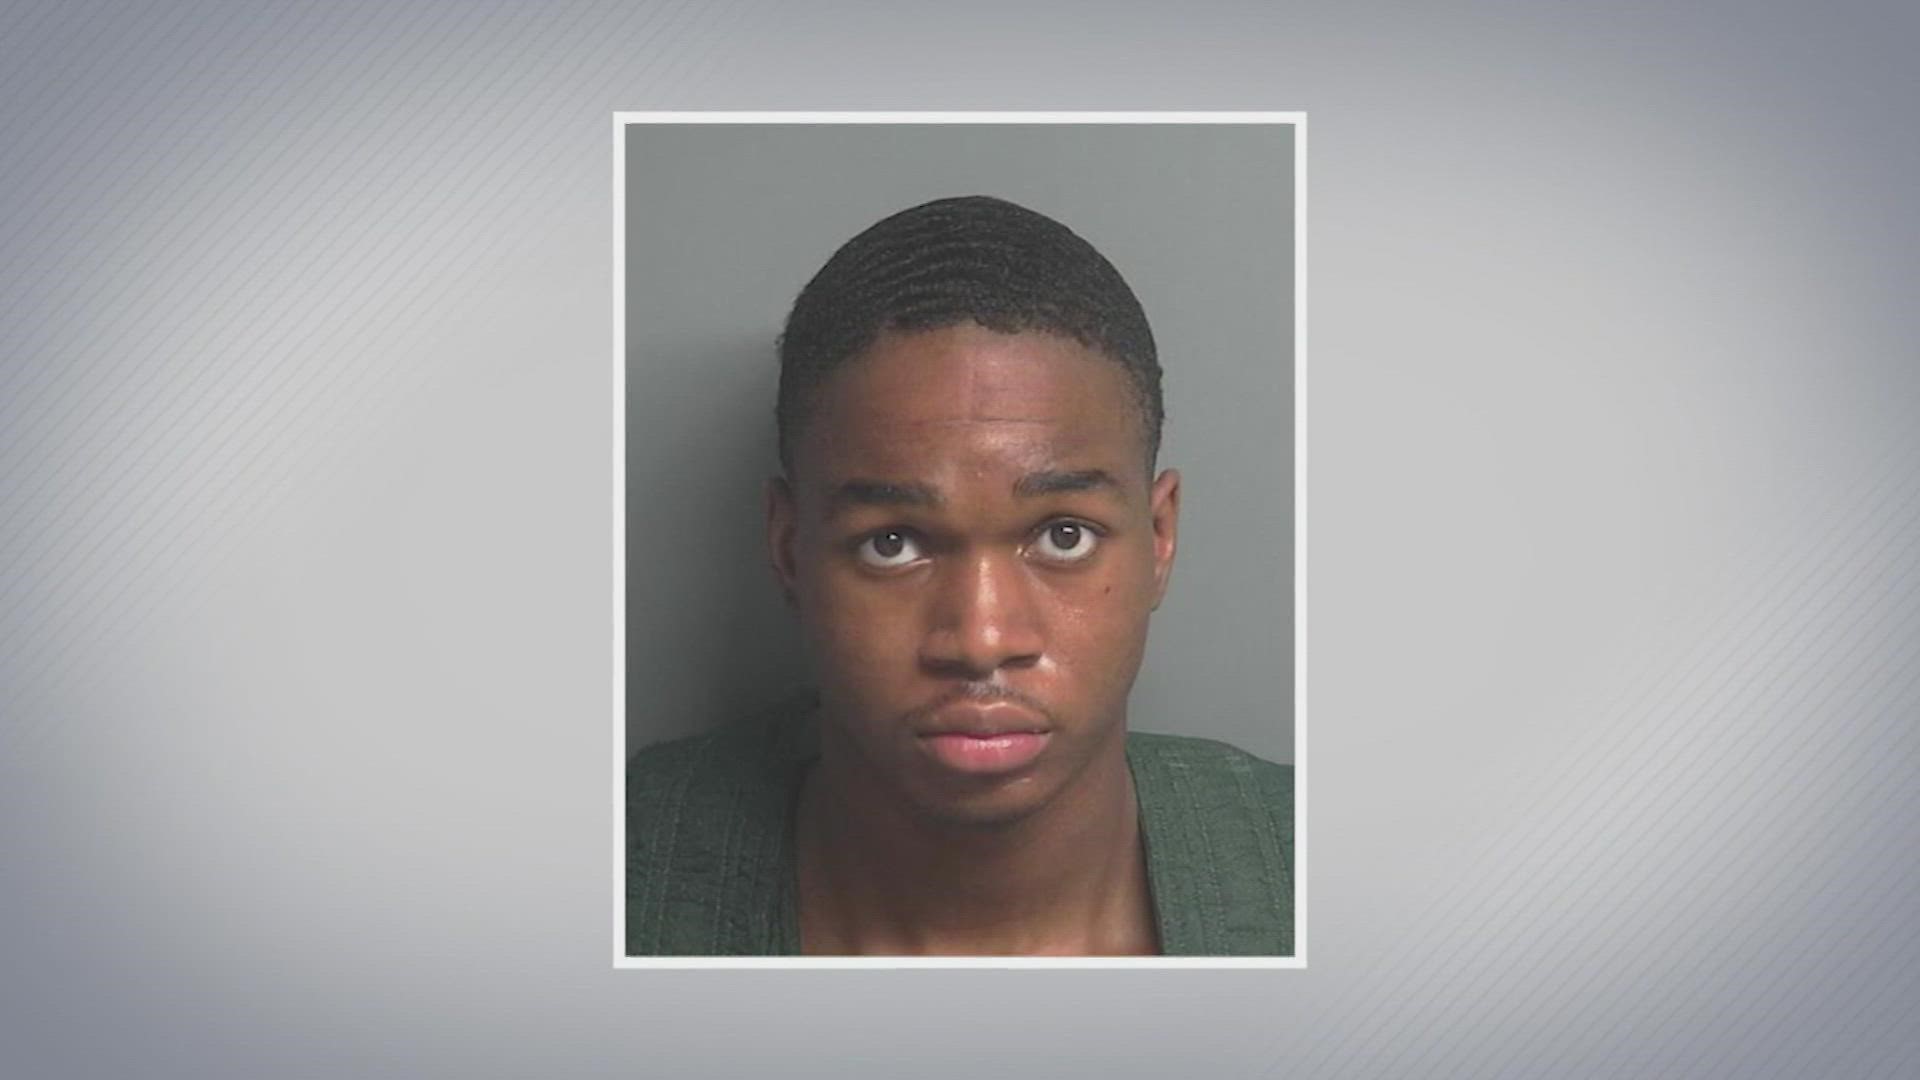 Bryan Smith Jr., 17, faces a capital murder charge after the Kingwood shooting of a Houston police officer's son Monday night.